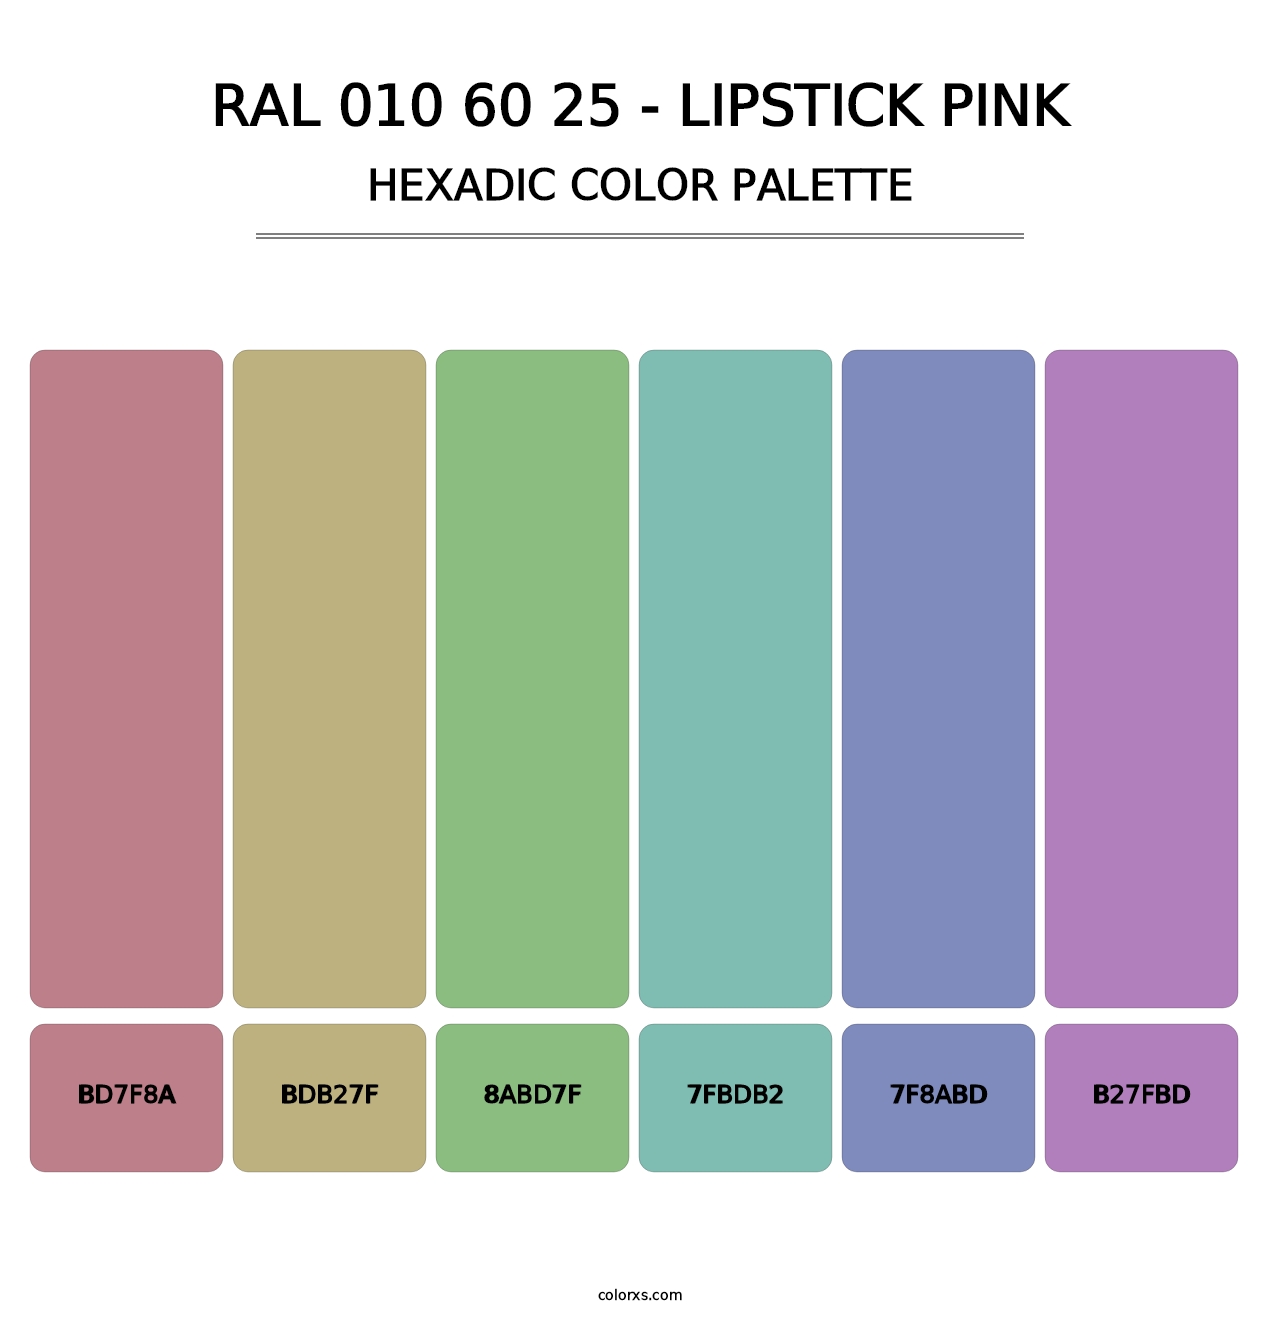 RAL 010 60 25 - Lipstick Pink - Hexadic Color Palette